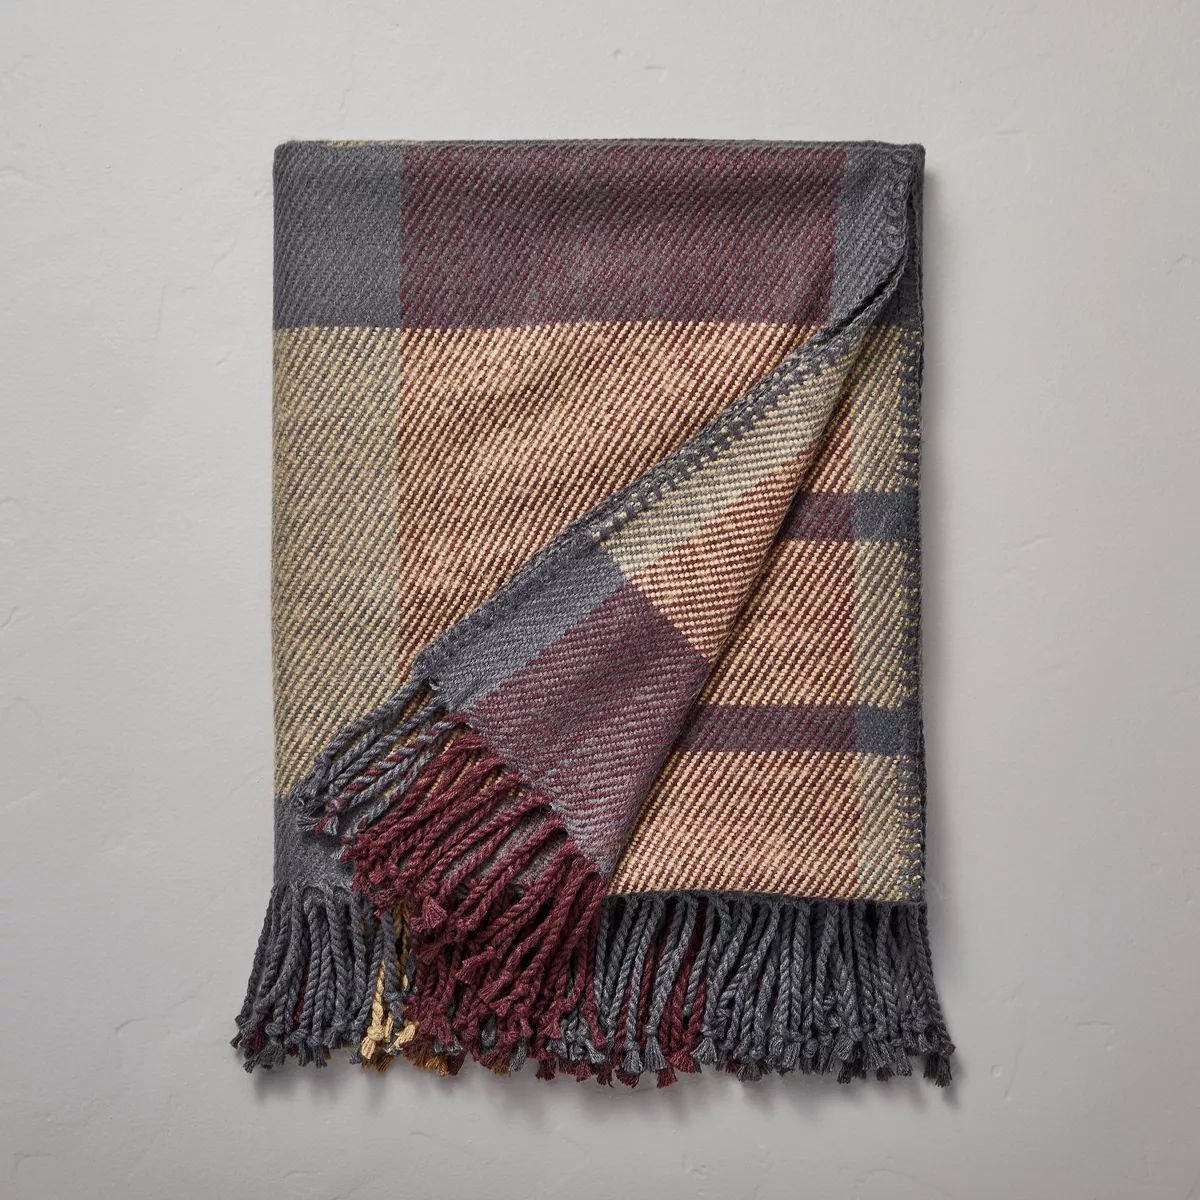 Harvest Fall Plaid Woven Throw Blanket - Hearth & Hand™ with Magnolia | Target